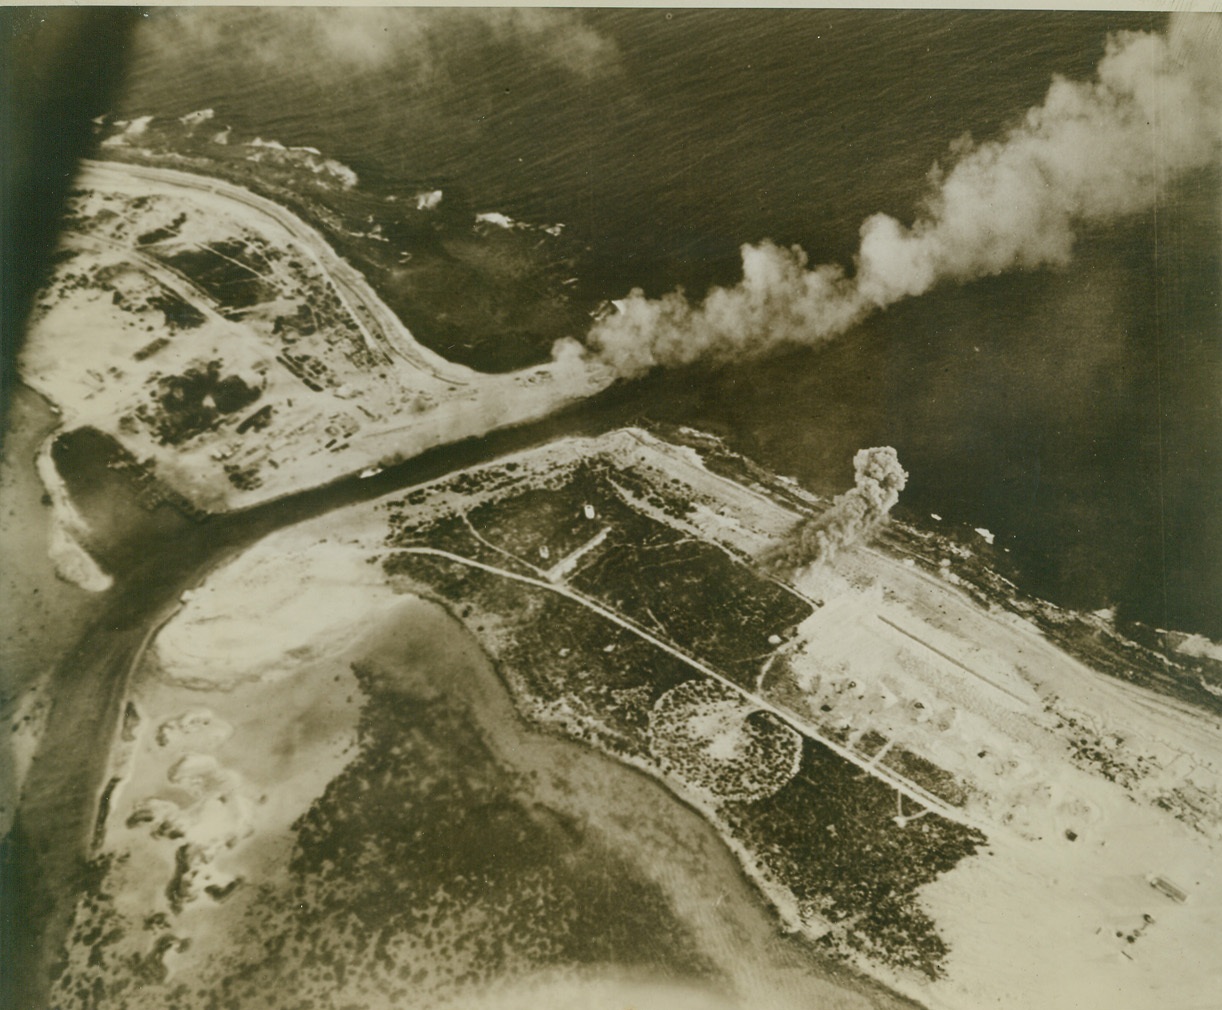 TANKER BURNS AS WAKE IS RAIDED, 10/13/1943. A small Jap tanker burns in the channel between enemy-held Wake Island (Left) and Wilkes Island (Right) as bombers of the U.S. Navy Task Force that raided the 3-island Wake Group pass over. Storage tanks have just been hit near the coast of Wilkes. Three hundred and twenty tons of bombs fell on Wake during the 2-day raid. Credit: U.S. Navy photo via OWI Radiophoto from ACME;